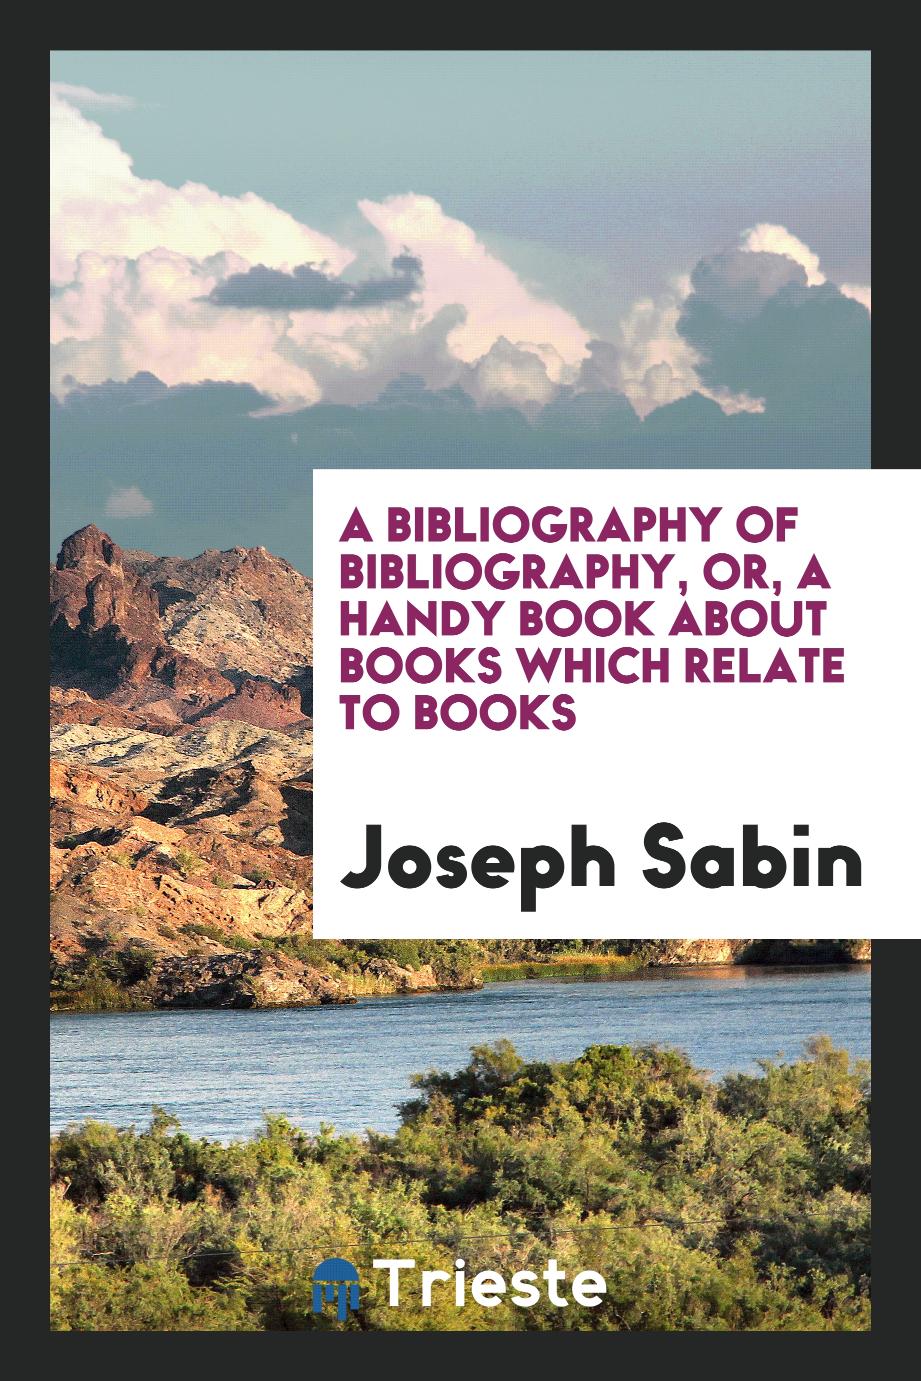 A Bibliography of Bibliography, or, A Handy Book about Books which Relate to Books